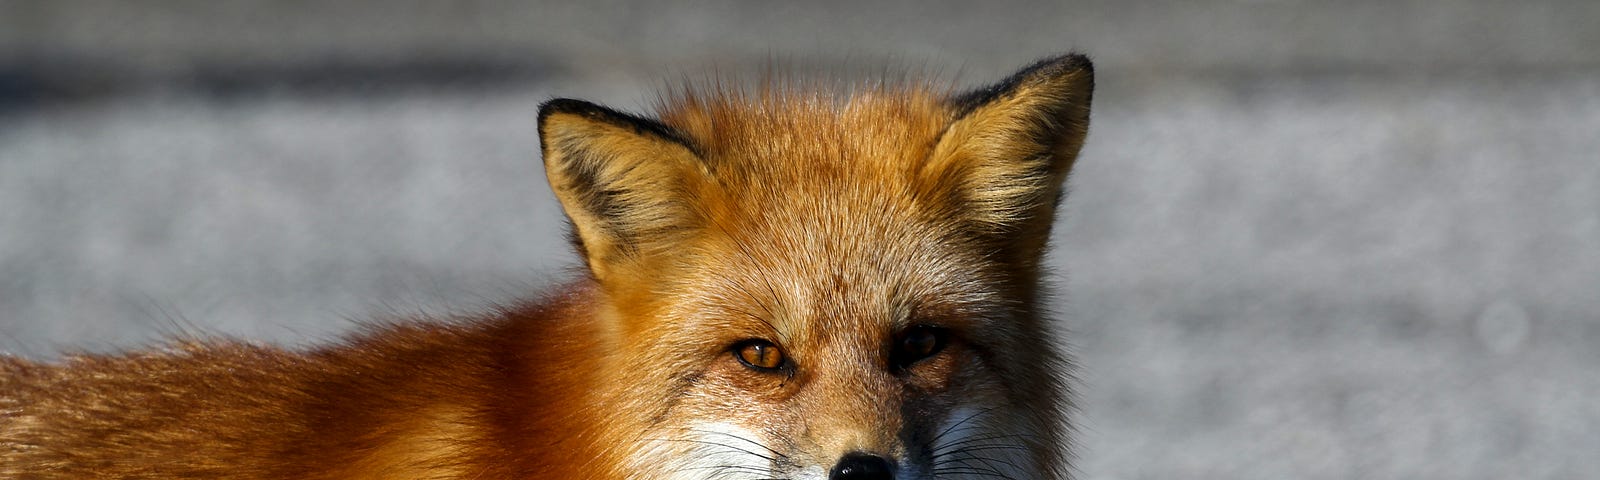 A furry fox looks quizzically from a winter landscape